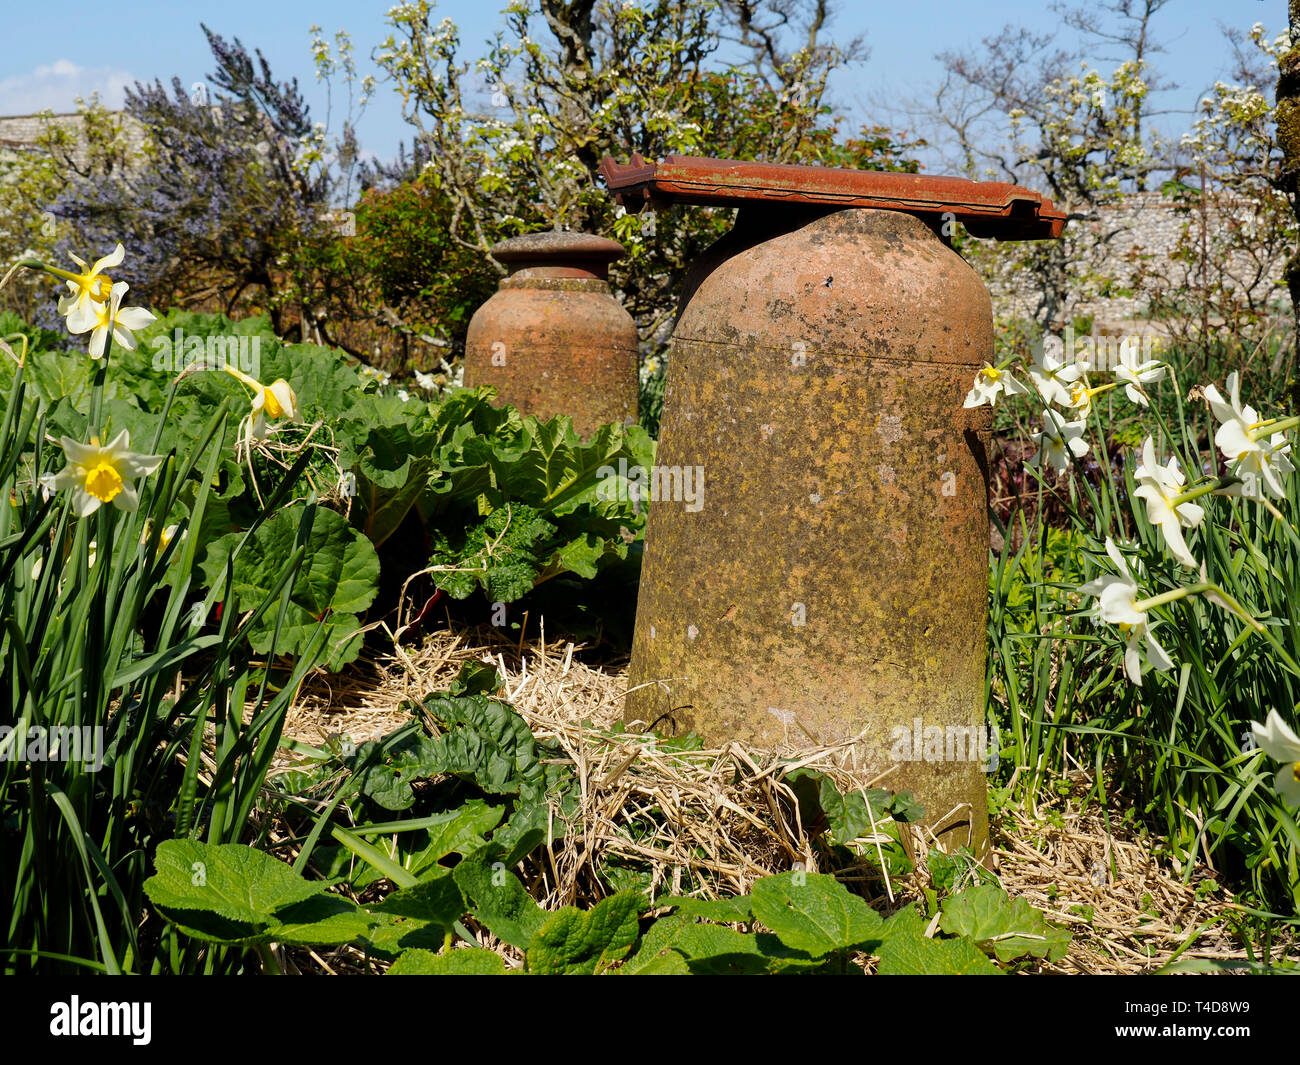 Old fashioned terracotta forcing jars used to force early rhubarb in this rustic country garden. Stock Photo